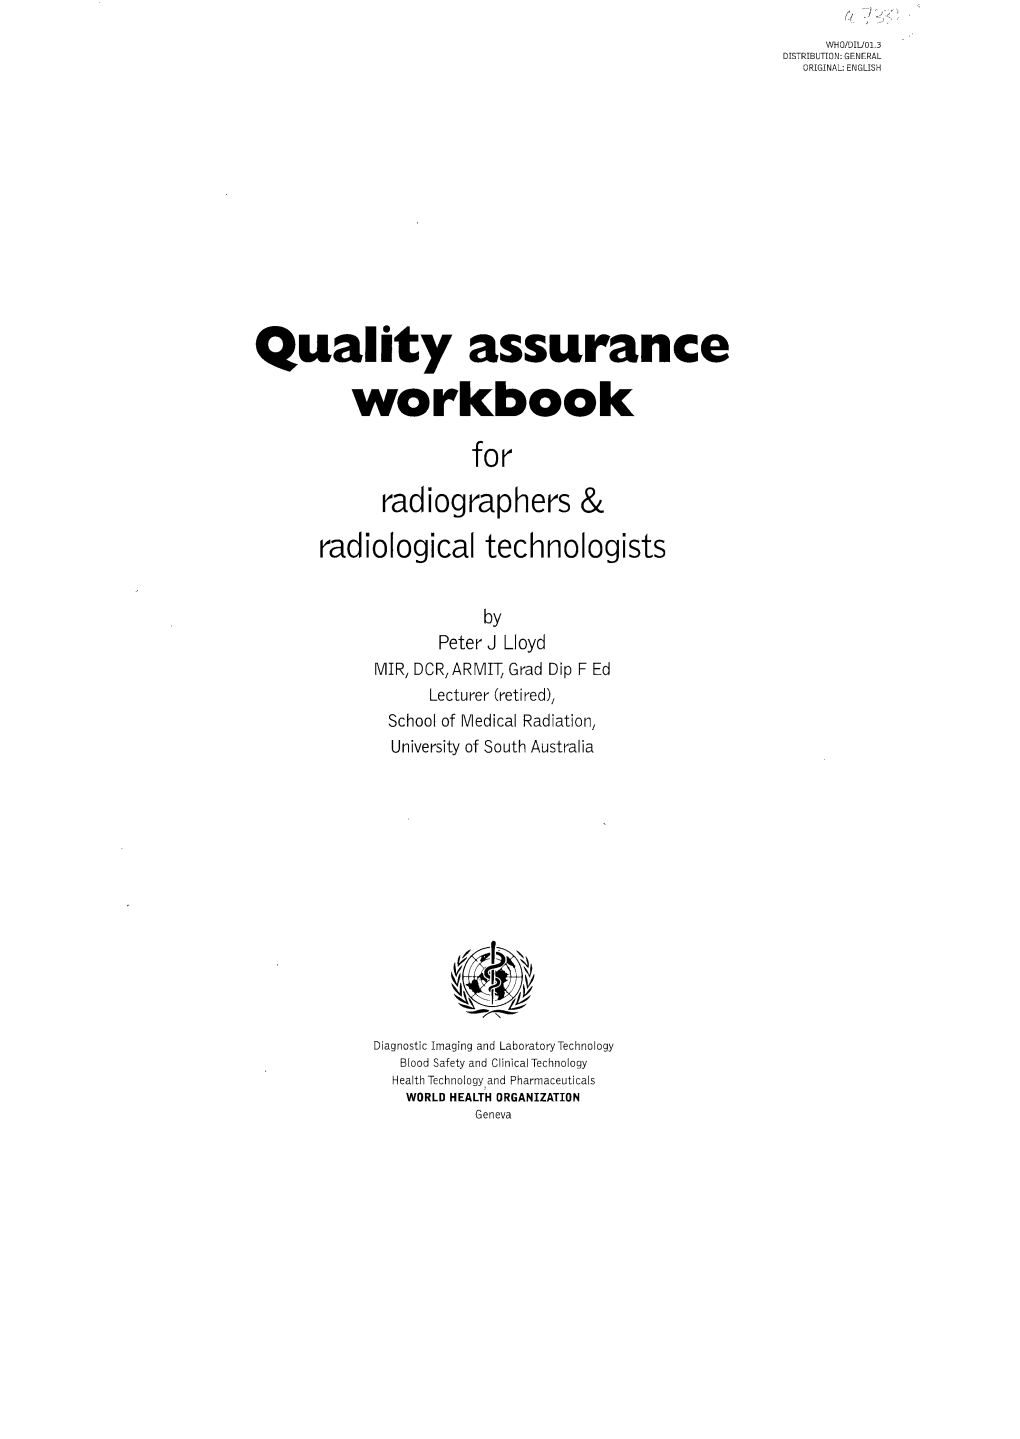 Quality Assurance Workbook for Radiographers & Radiological Technologists